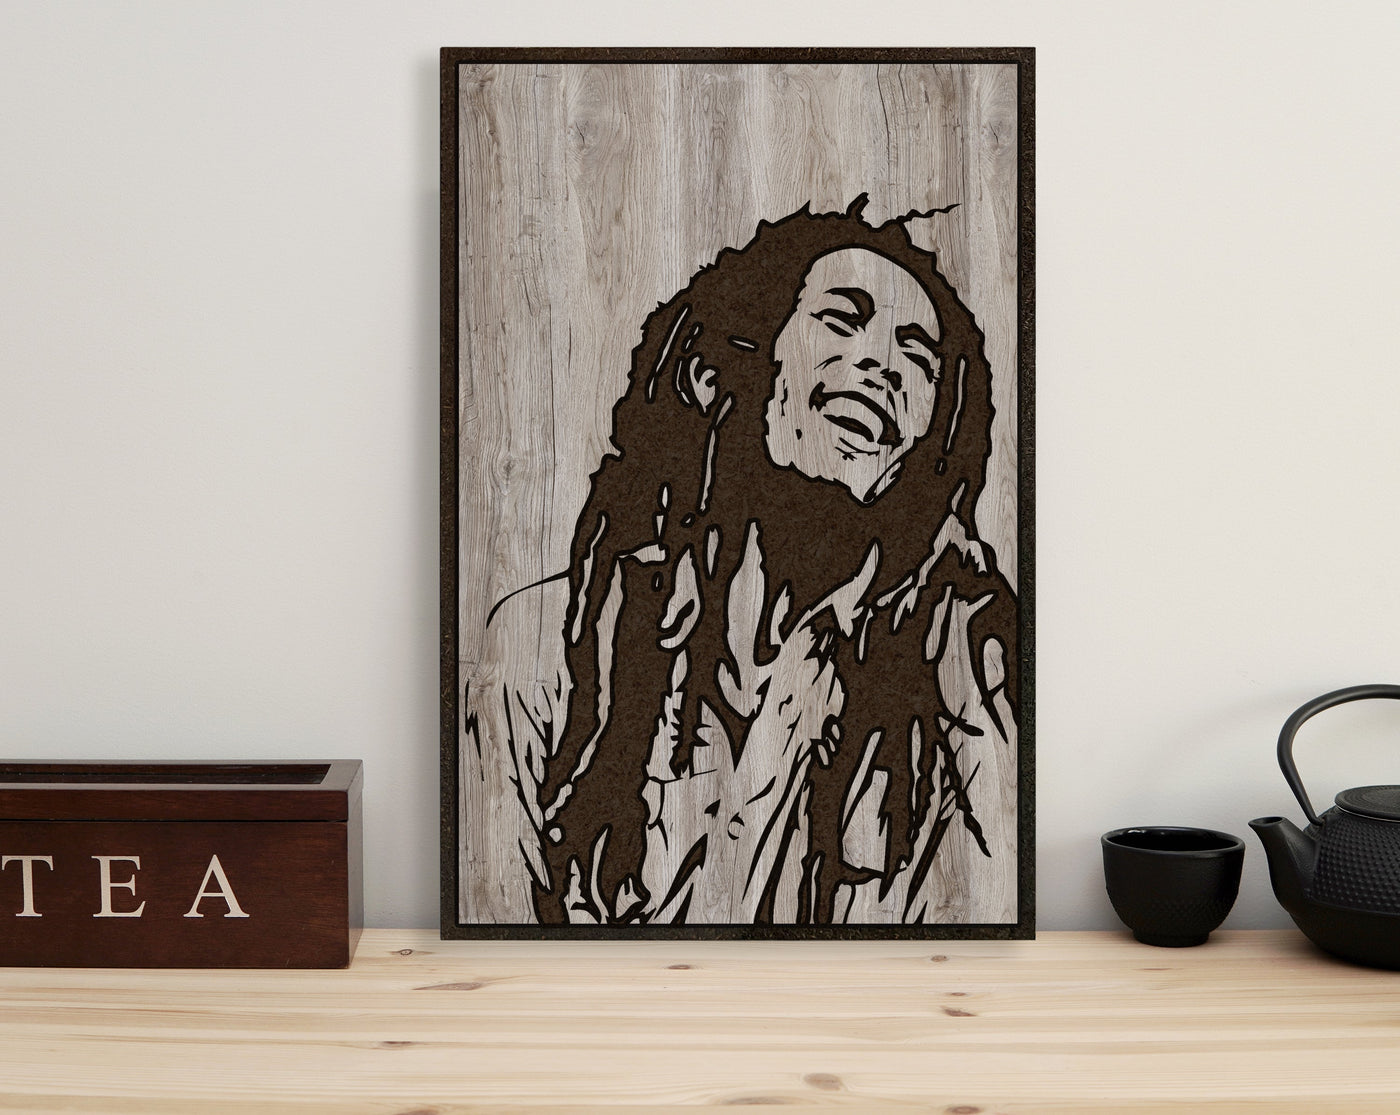 picture of bob marley to hang on wall